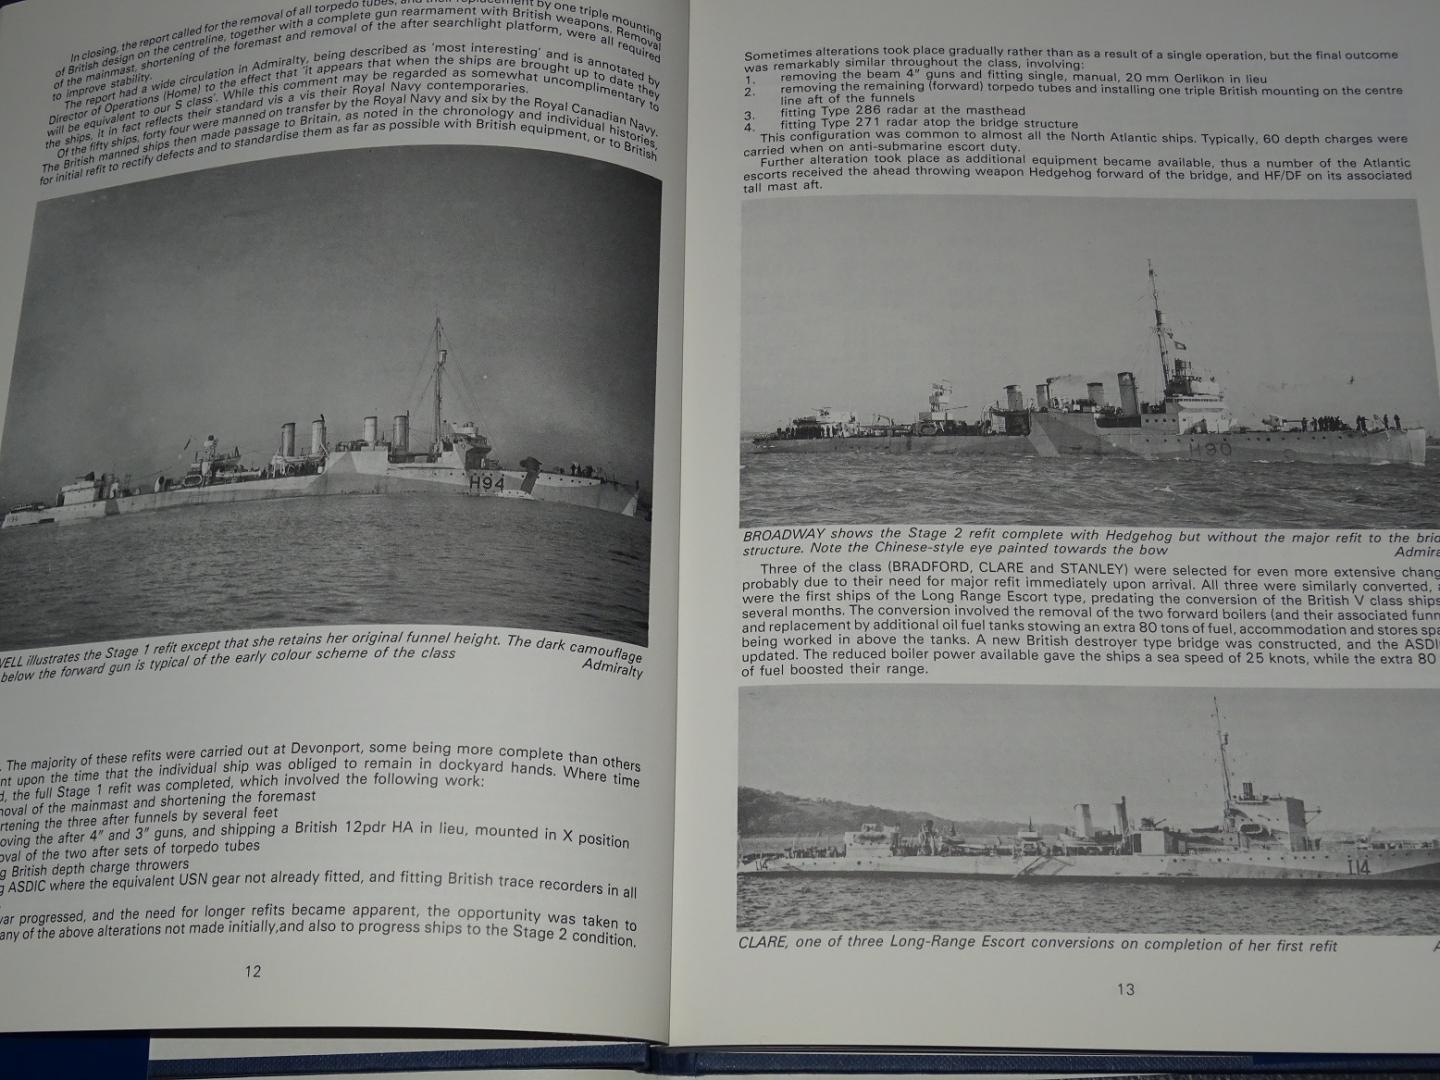 Hague, Arnold - Destroyers for Great Britain : A History of the 50 Town Class Ships transferred from the United States to Great Britain in 1940